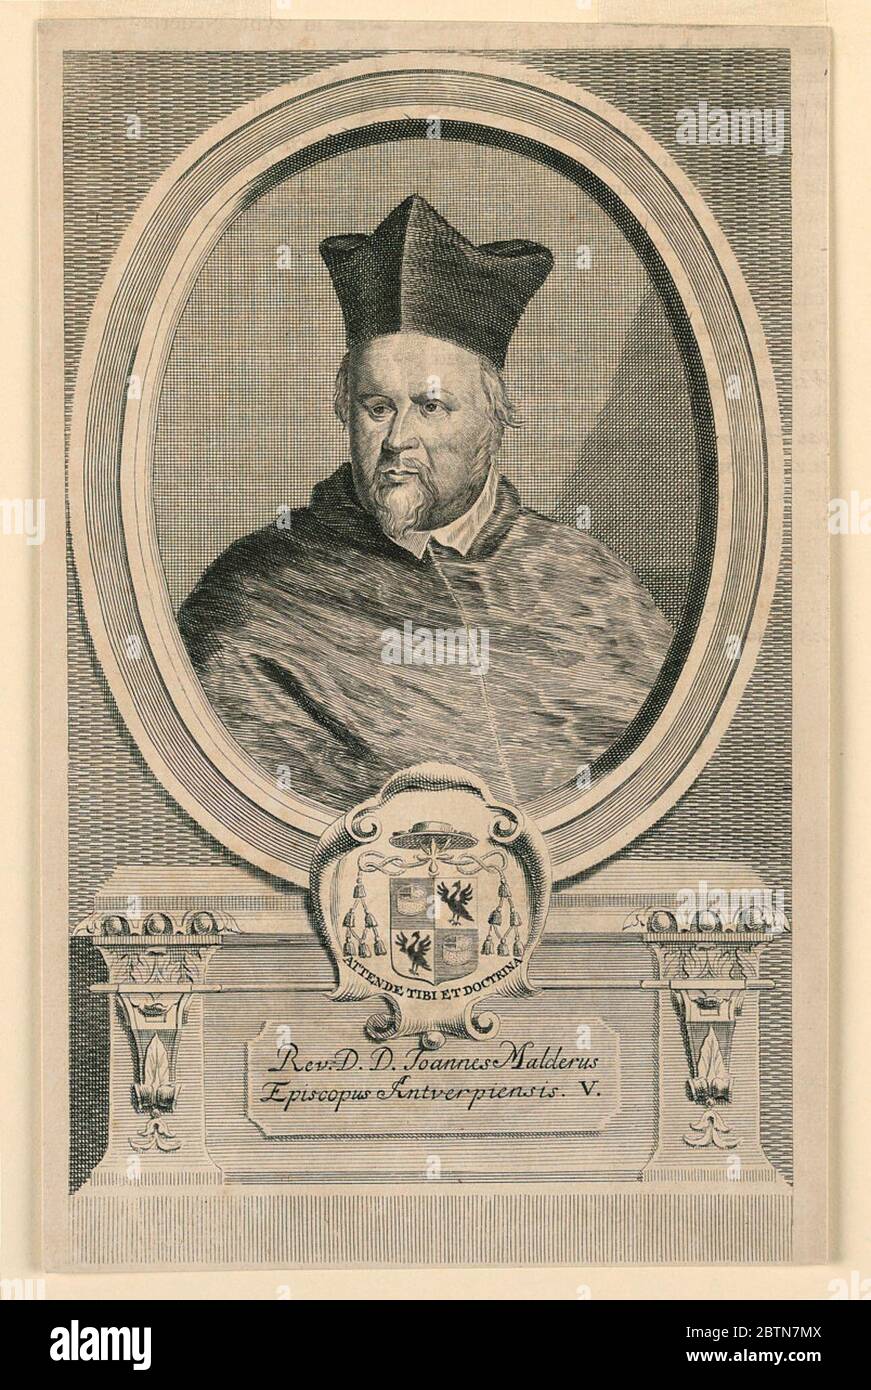 Portrait of Joannes Malderus Bishop of Antwerp. Research in ProgressWithin an oval frame is the bust portrait of a cleric, wearing a beretta, a van dyck beard, and side whiskers. Below, his escutcheon and motto, and inscription. Stock Photo